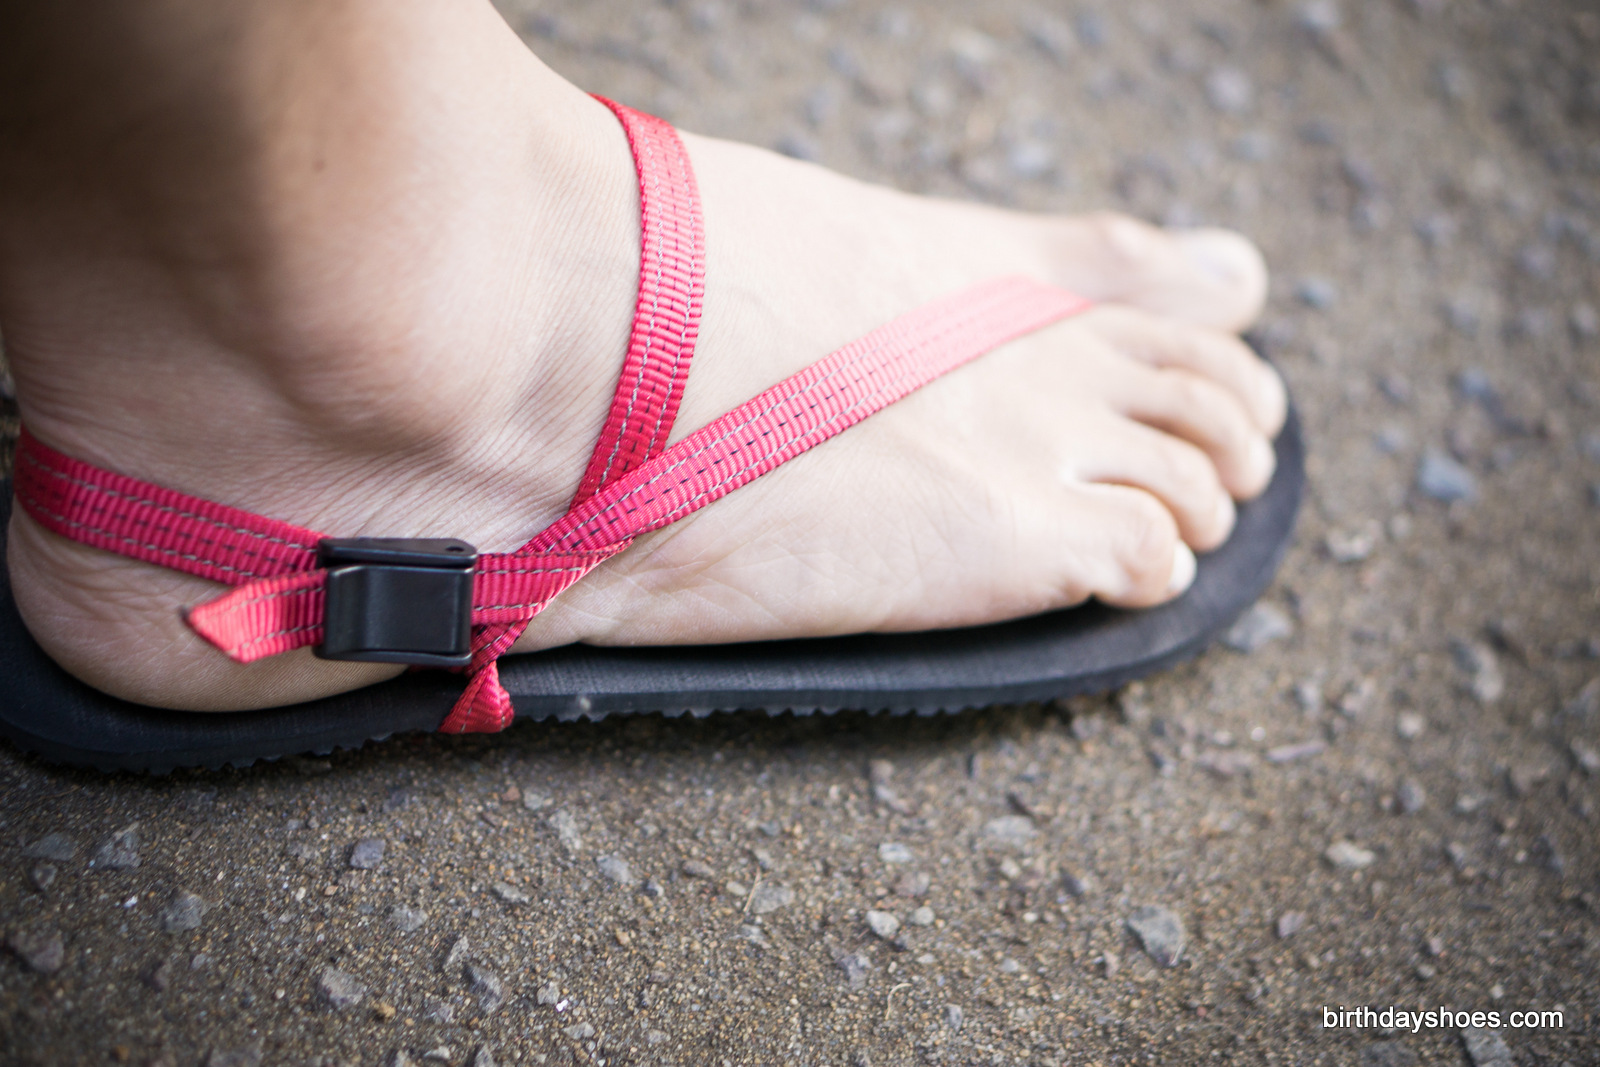 The conductive lace version of the Circadian has multiple points of adjustments, rather than having a single "fit" for the entire sandal. You can individually adjust for the tension of the main strap between the toes, the upper strap on top of your feet, and the heel strap behind the achilles